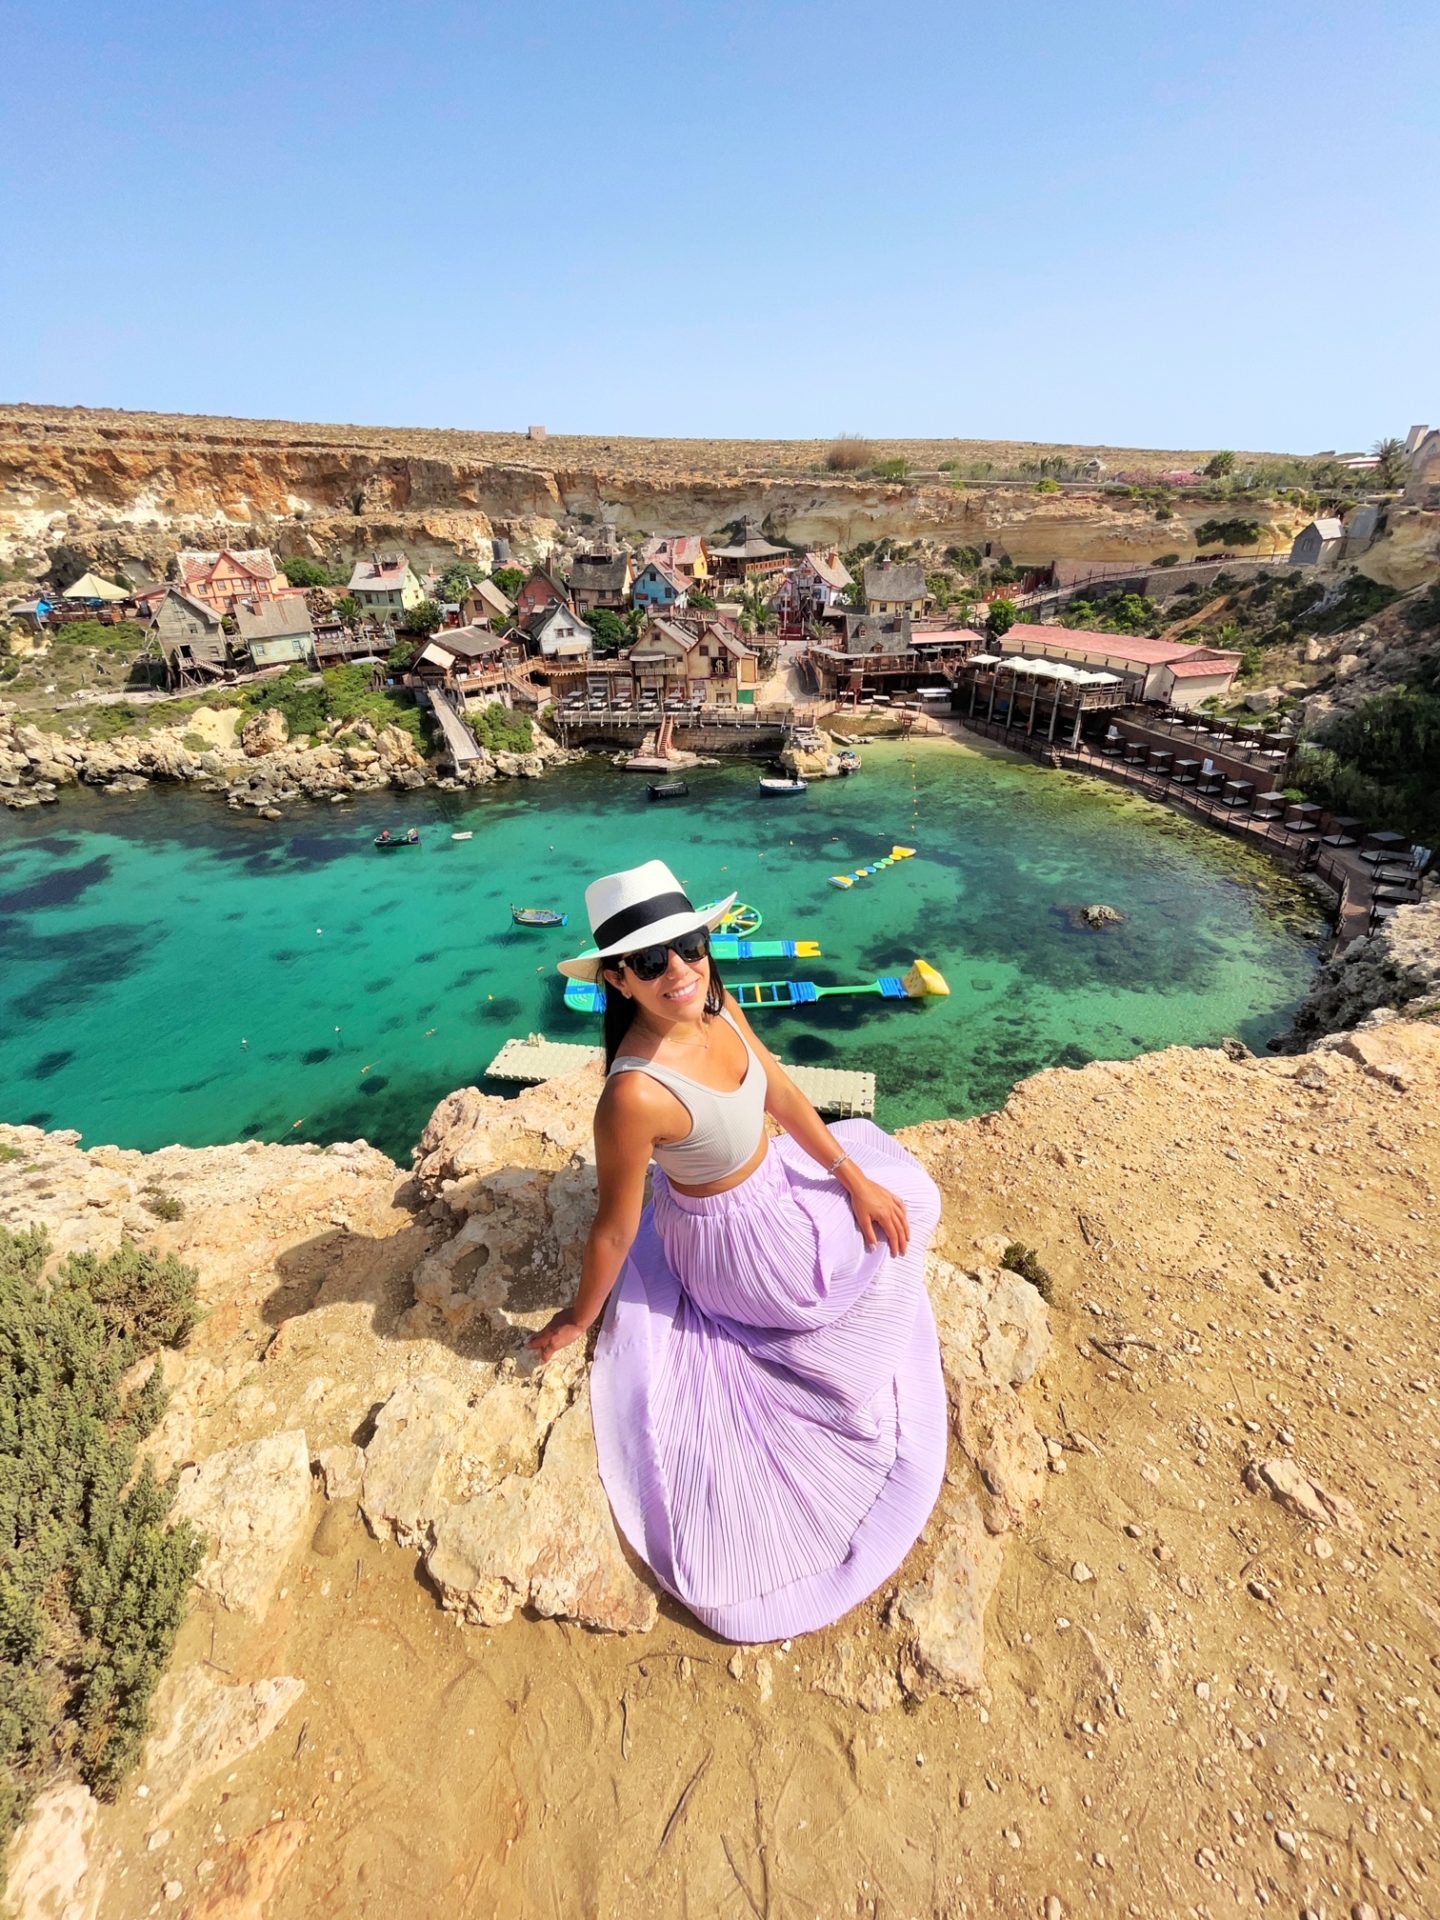 10+2 THINGS TO DO IN MALTA